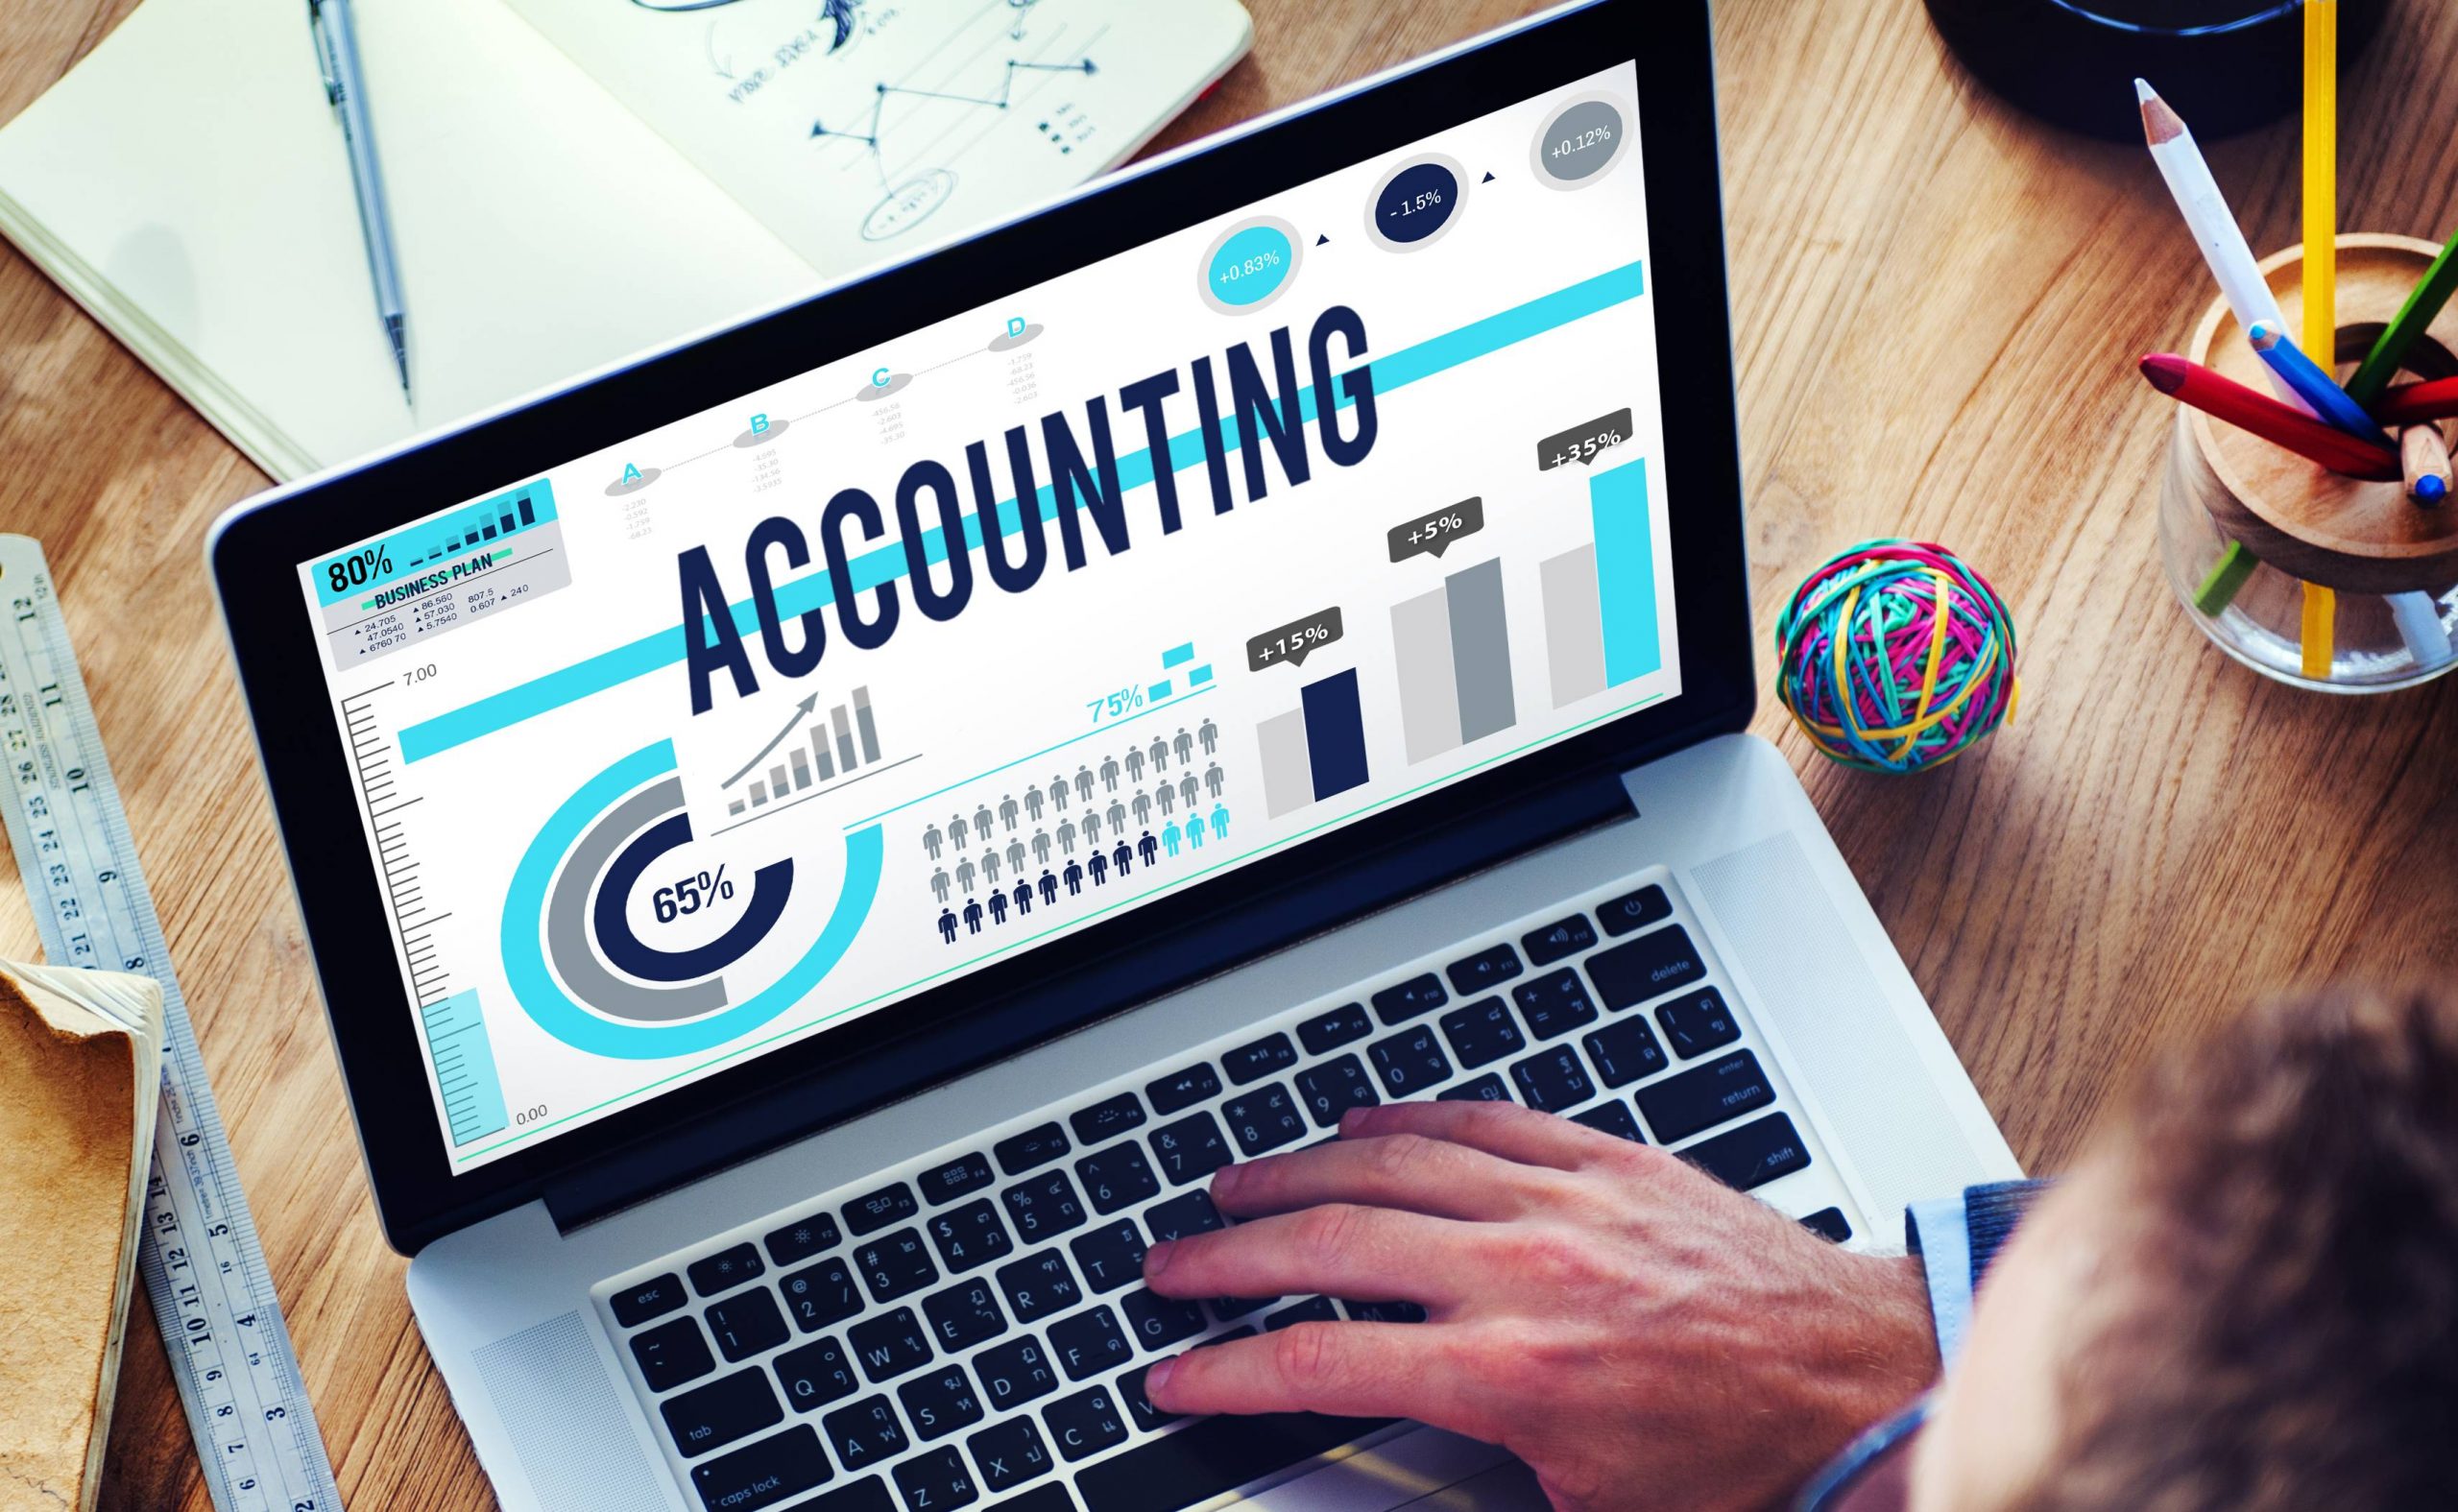 Bookkeeping and Accounting Services